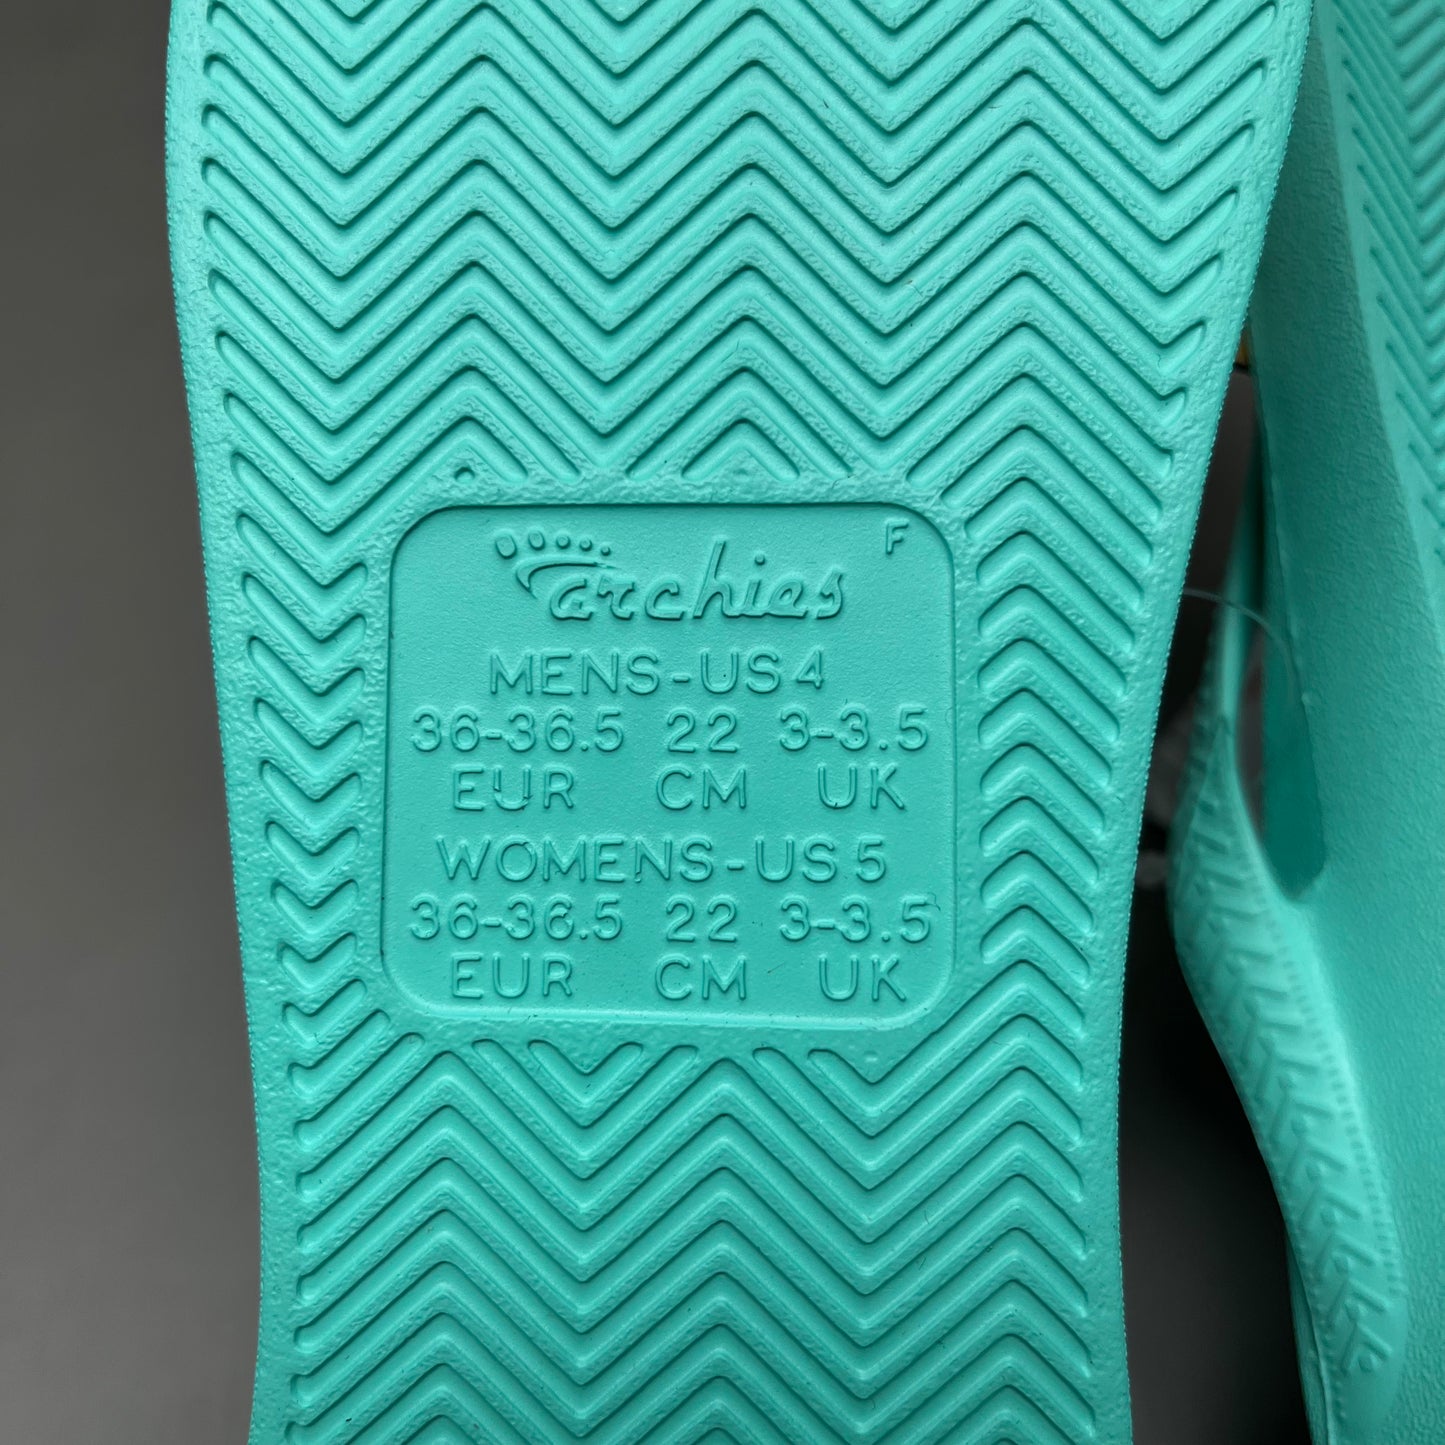 ARCHIES Arch Support Thongs HIGH SUPPORT Flip Flops Wmn's Sz 5 Men's Sz 4 Teal (New)